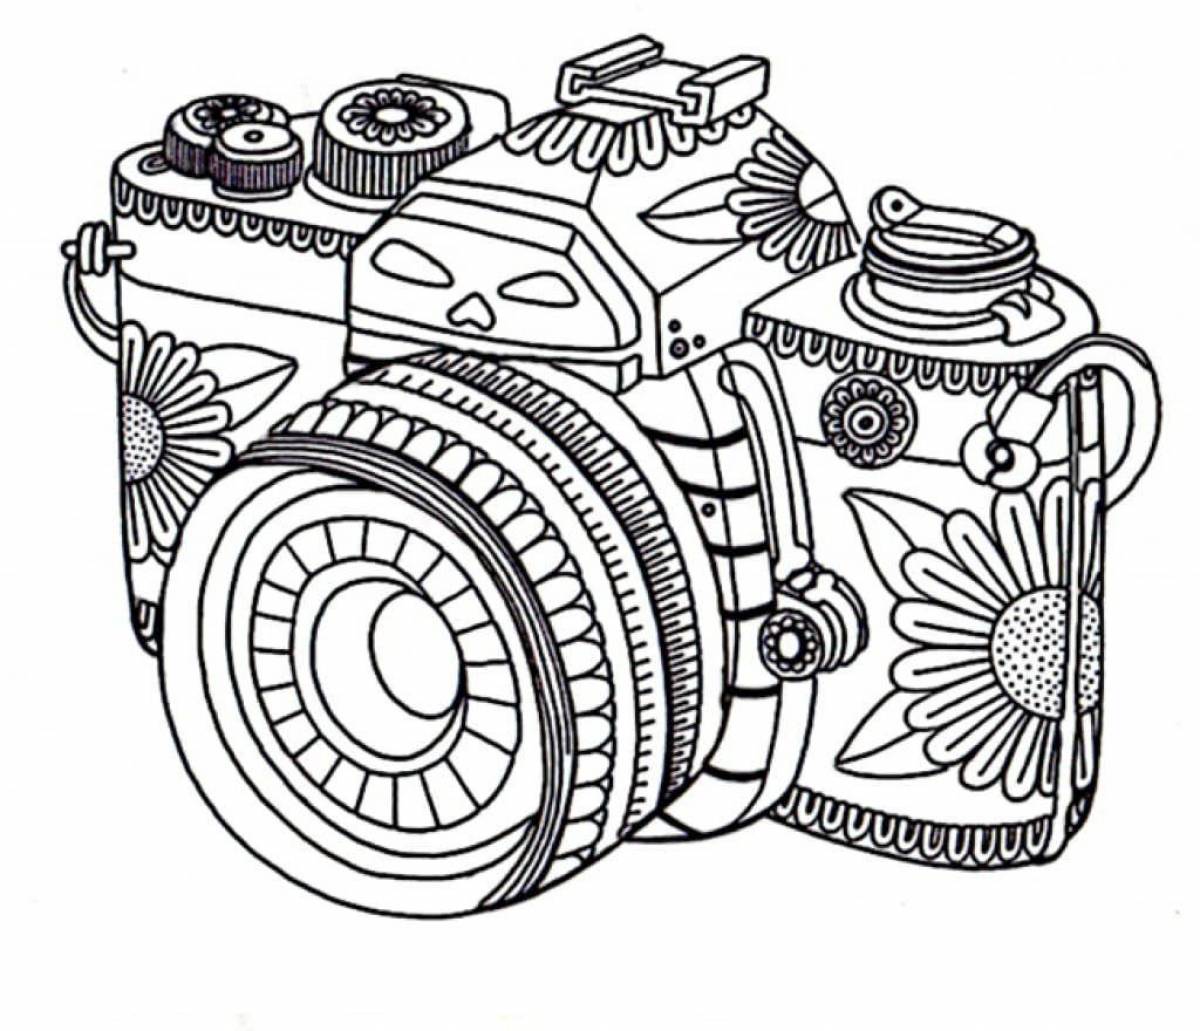 Colorful camera coloring page